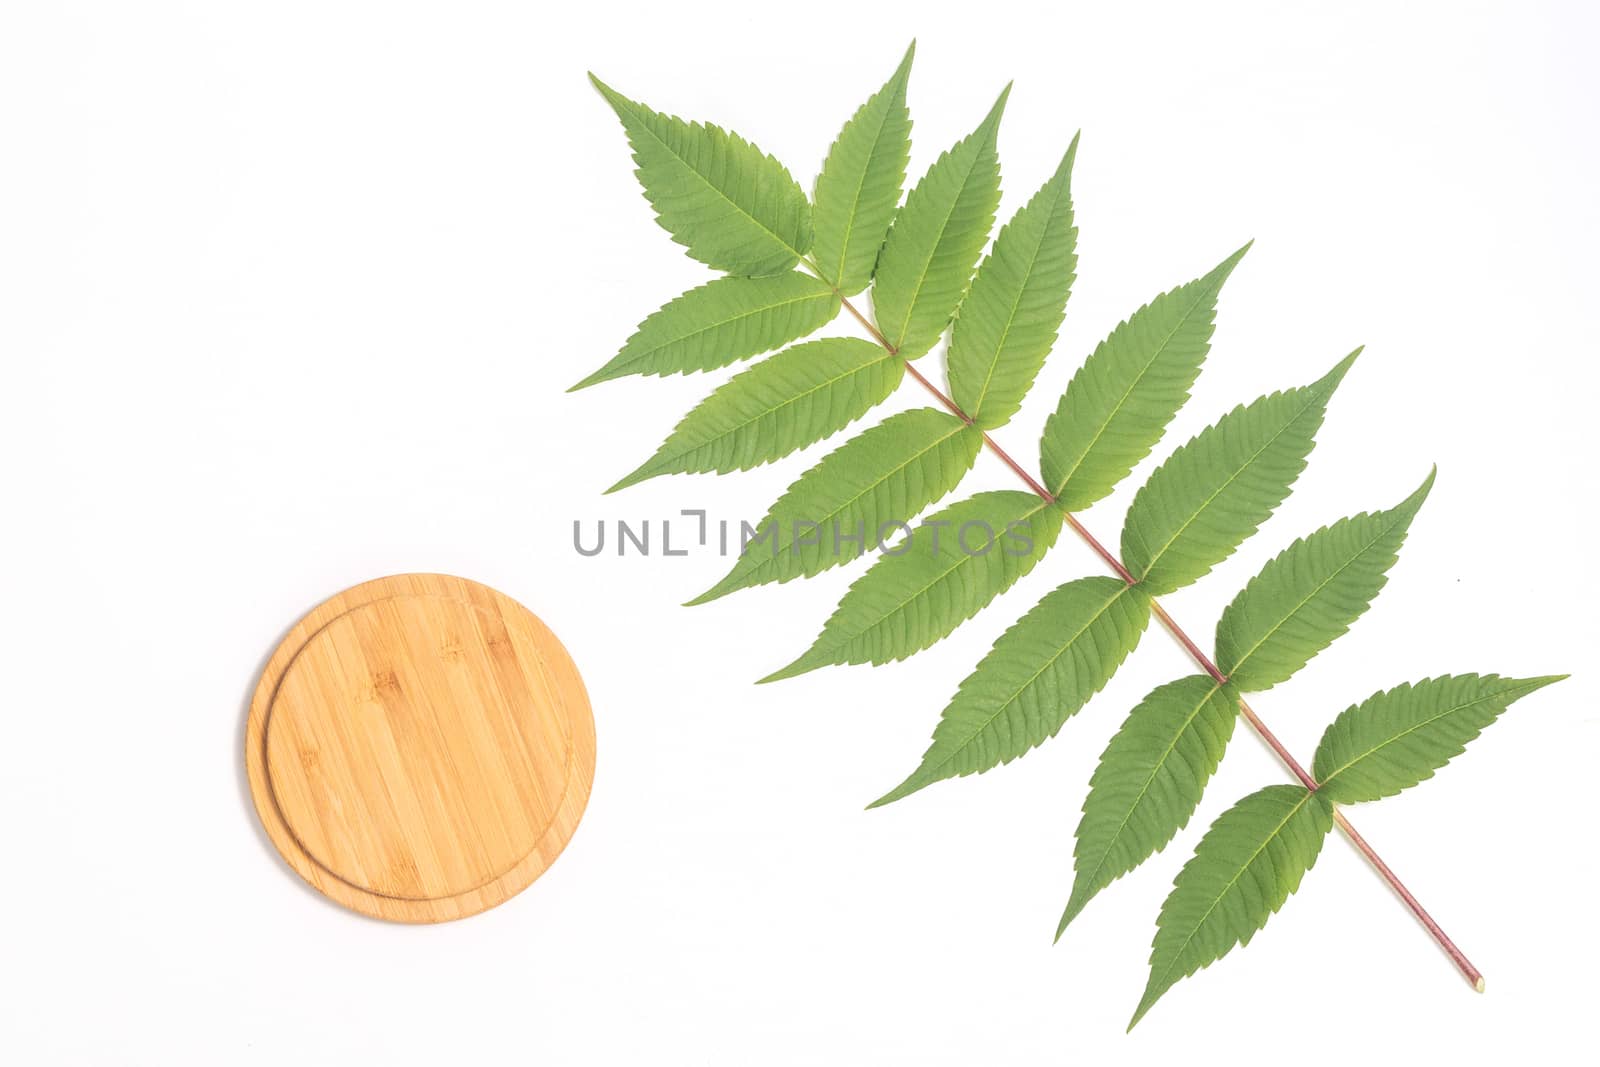 Bamboo Cutting Board with green leaf of white whalnut on white background by galinasharapova